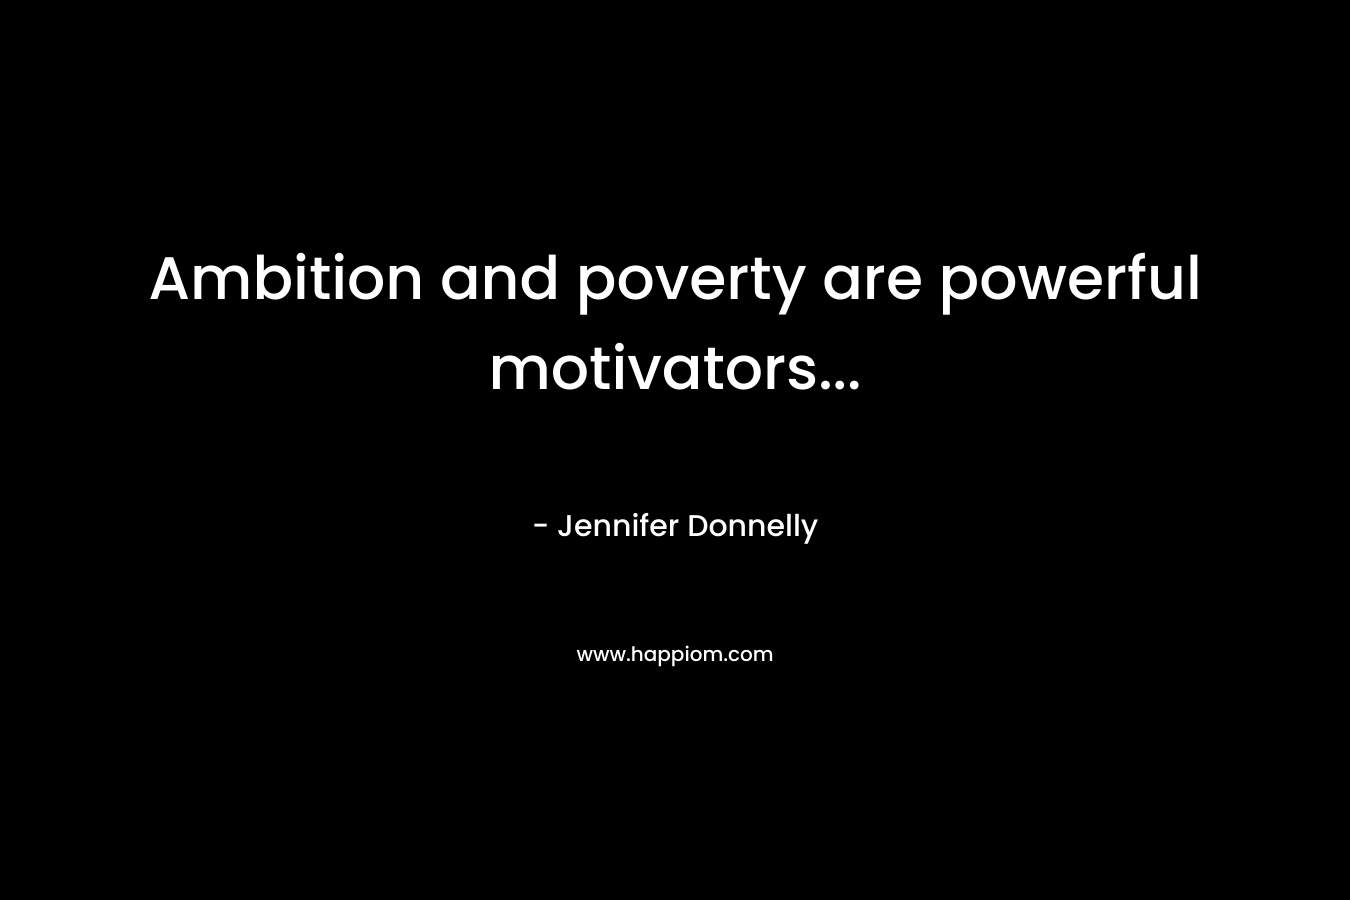 Ambition and poverty are powerful motivators...